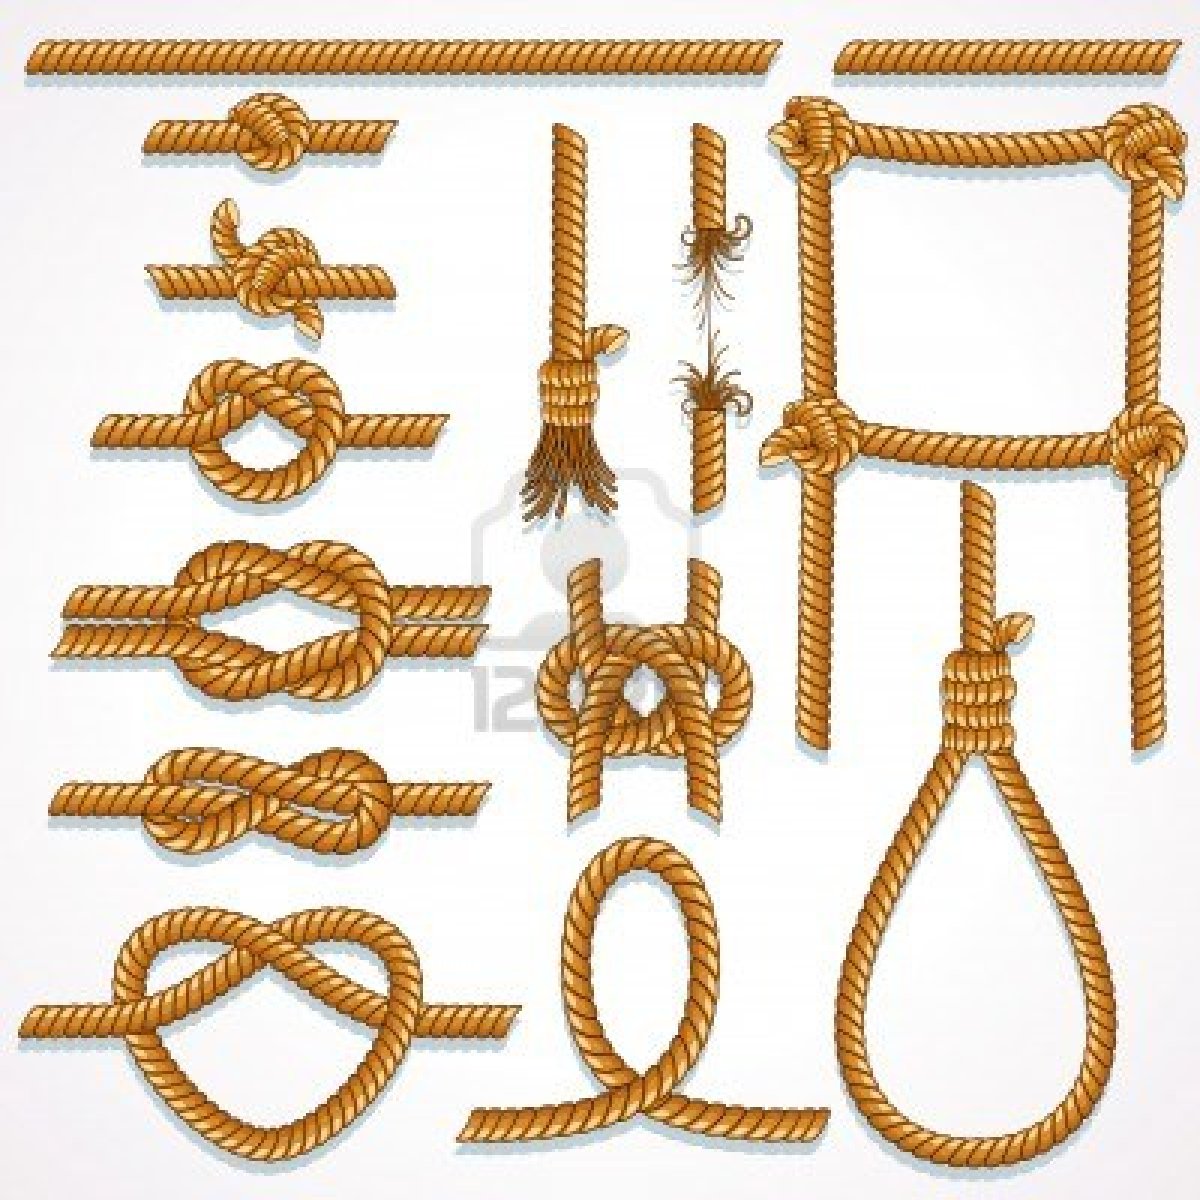 rope clipart vector - photo #41